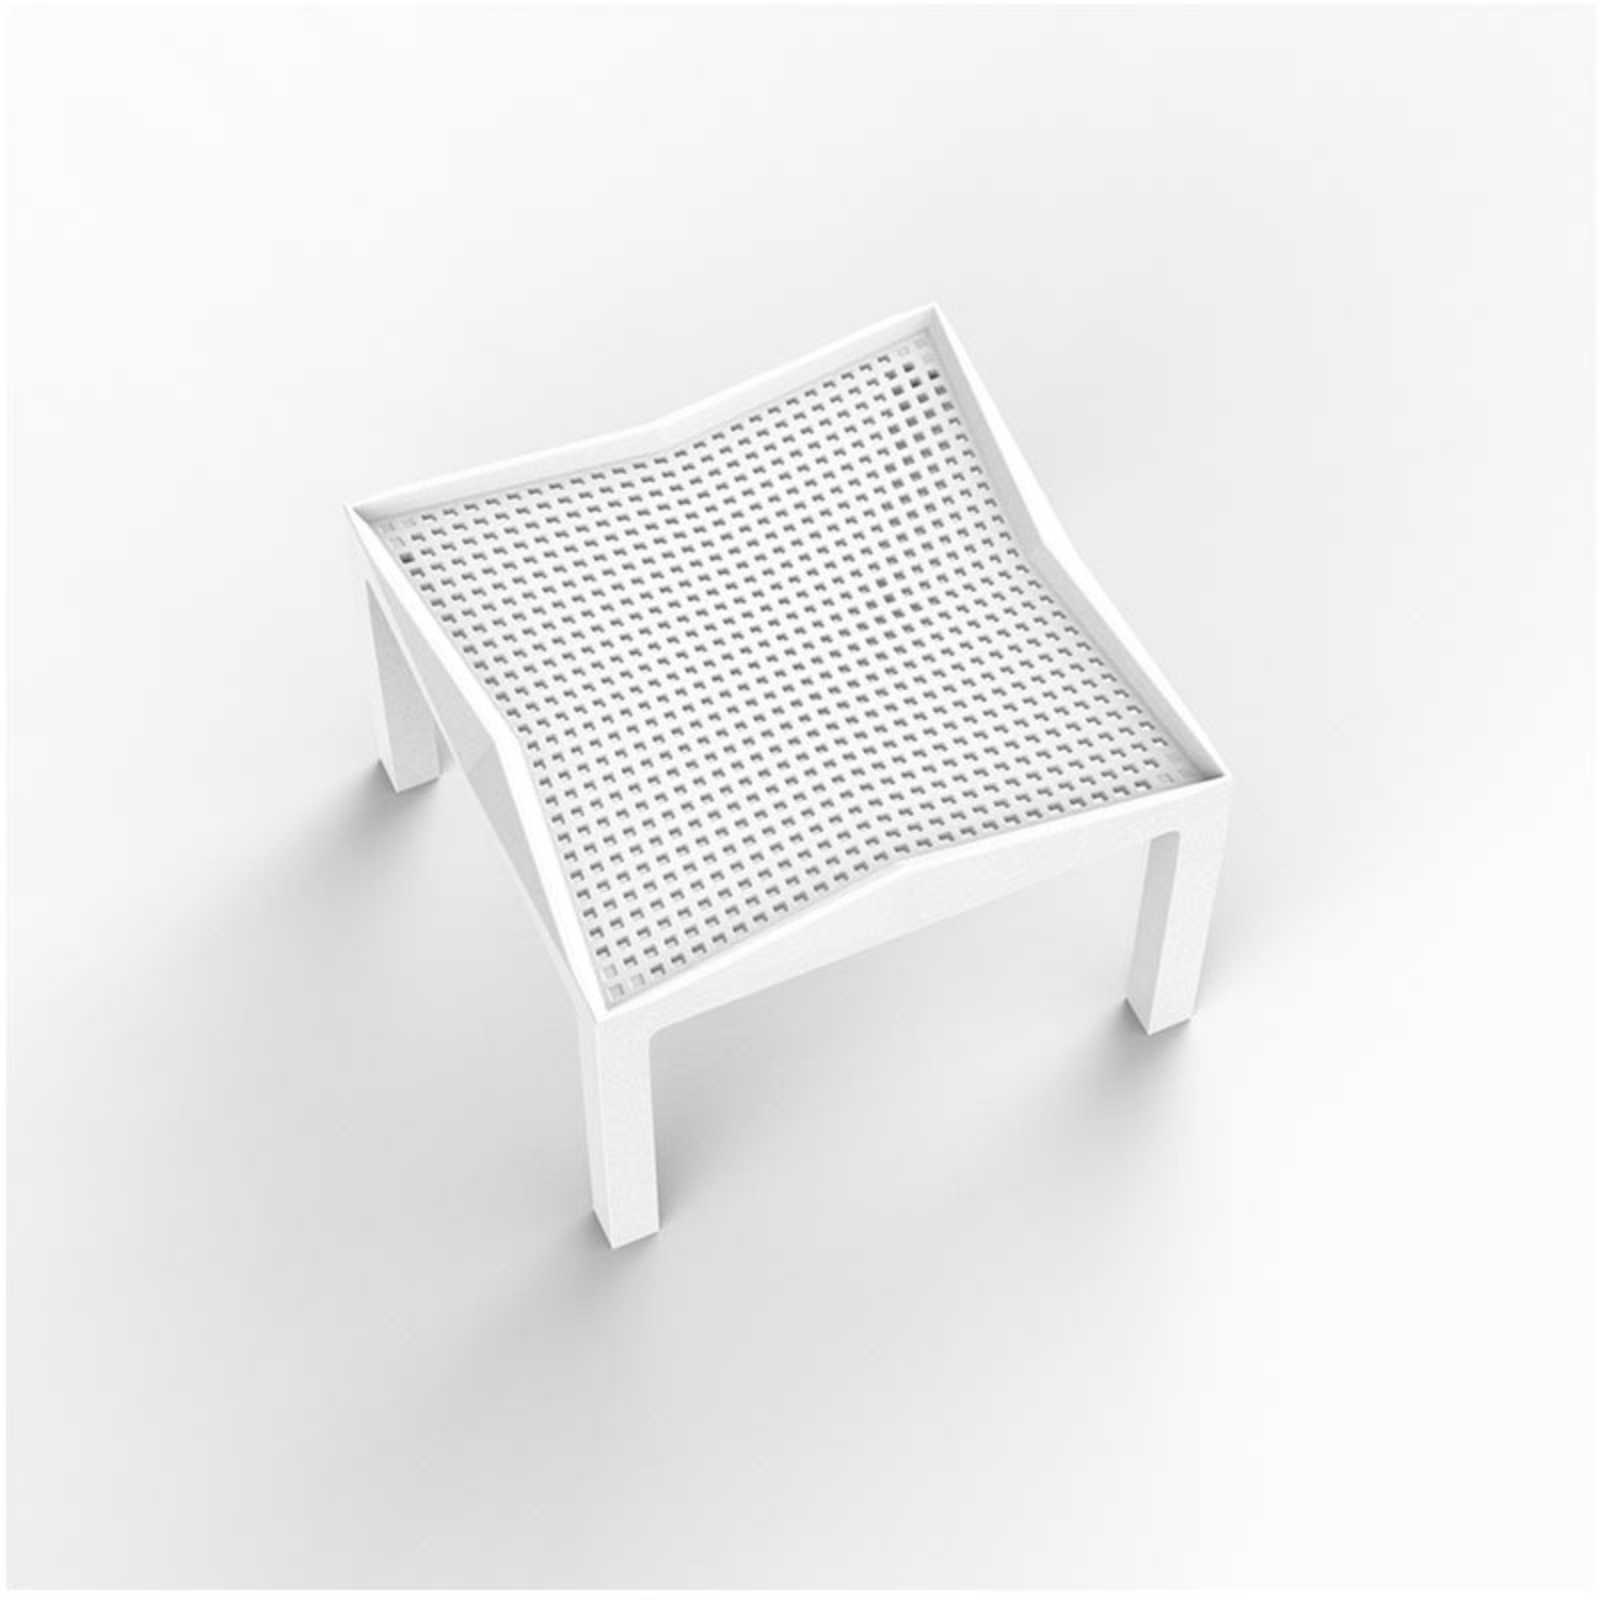 VOXEL OCCASIONAL TABLE